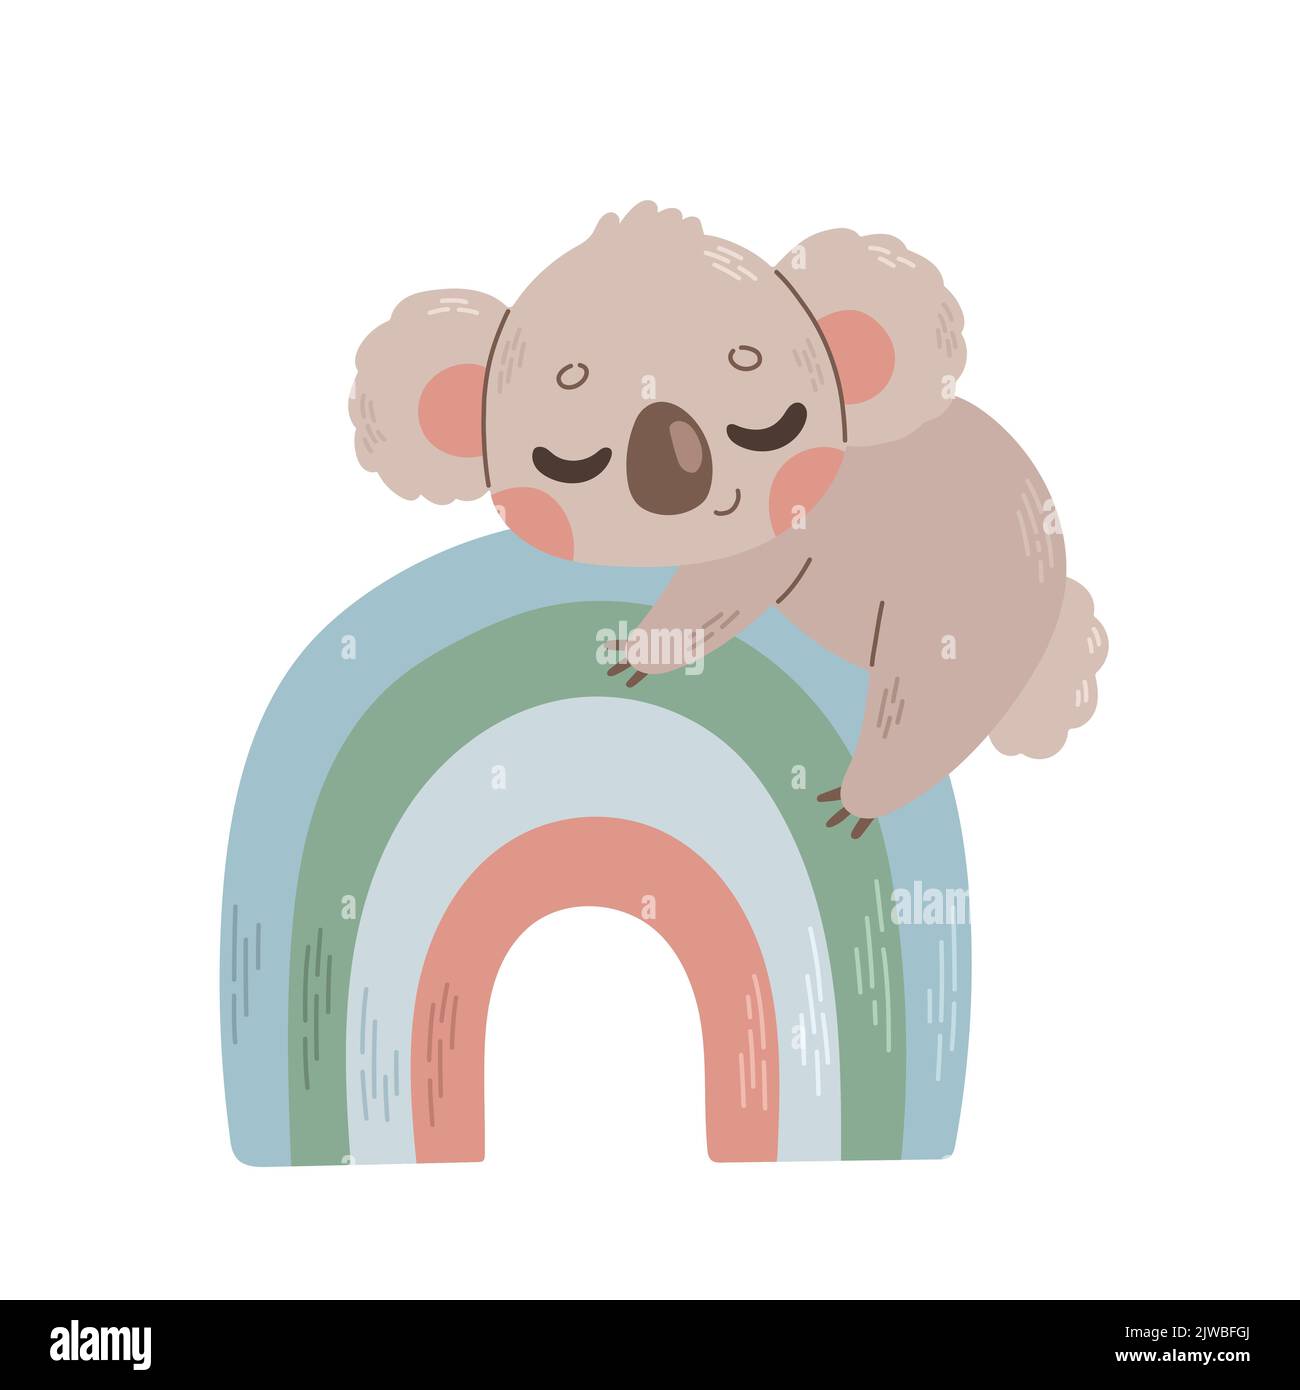 Koala rainbow Cut Out Stock Images & Pictures - Alamy